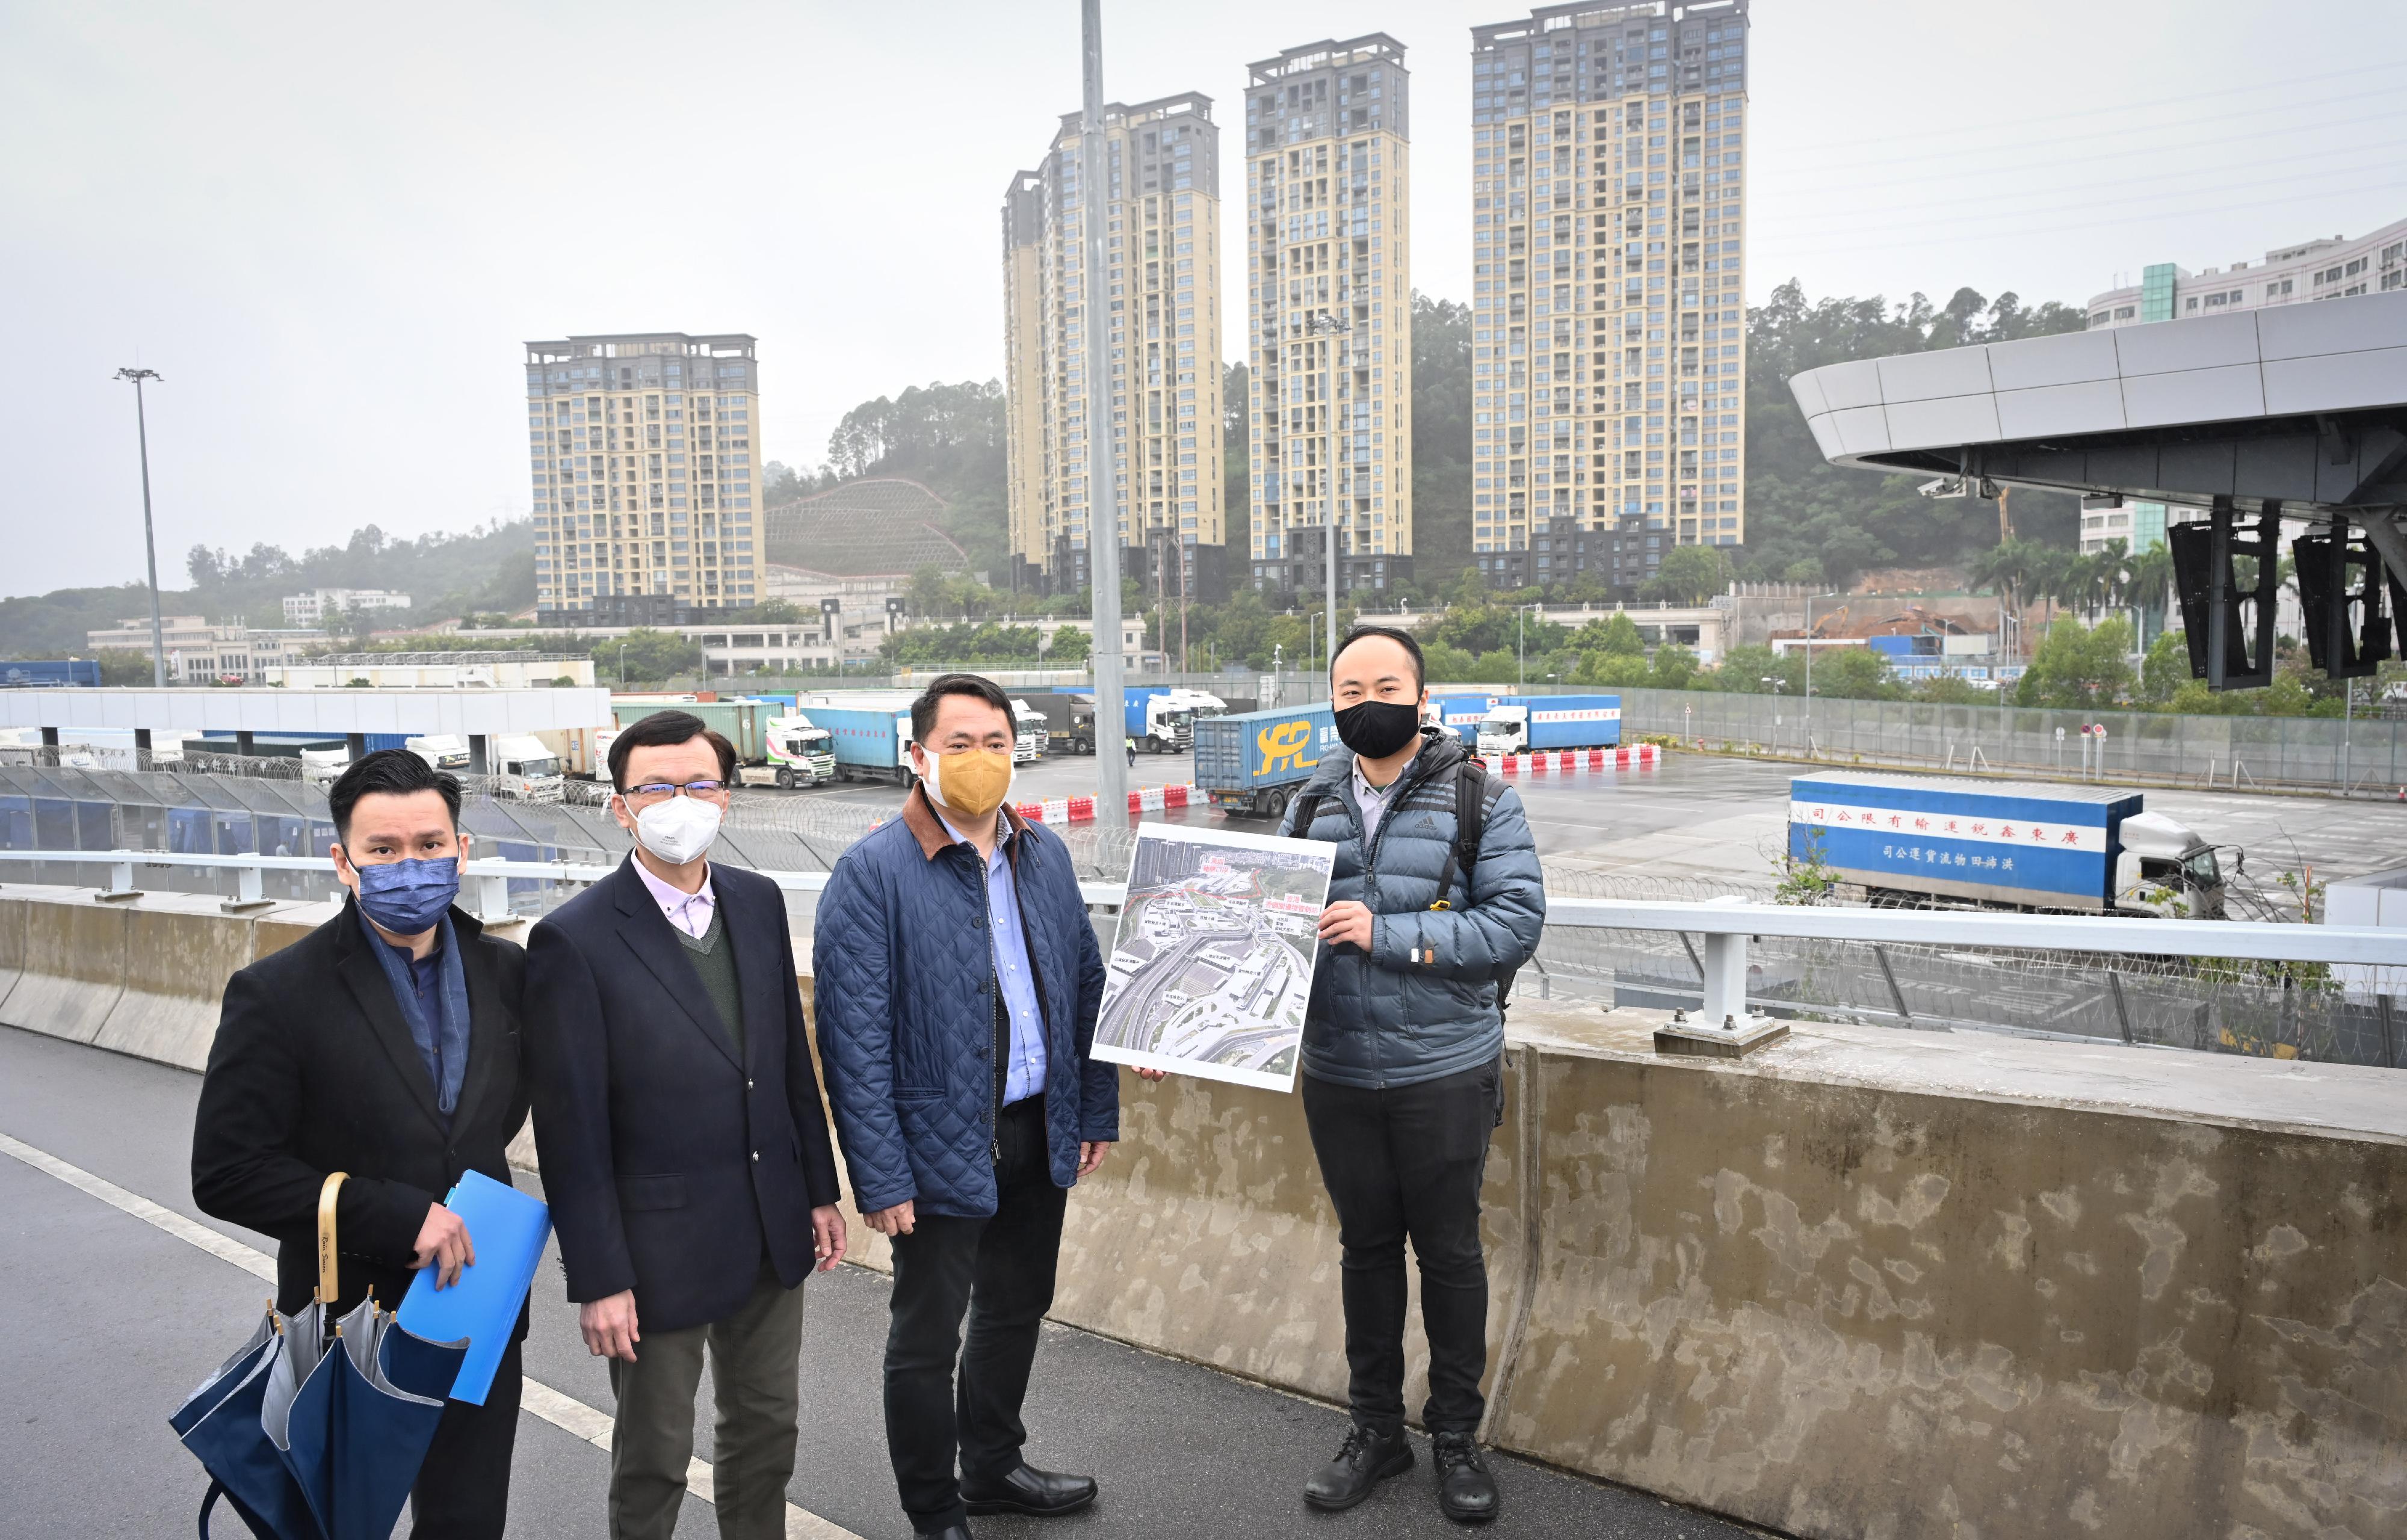 The Acting Secretary for Transport and Logistics, Mr Liu Chun-san, visited the Heung Yuen Wai Boundary Control Point this morning (December 16) to inspect cross-boundary land transport of goods. Photo shows Mr Liu (second left) being briefed by Assistant Commissioner for Transport (New Territories) of the Transport Department, Mr Patrick Wong (second right), on the latest cross-boundary land transport situation after resuming the "point-to-point" transport arrangement.